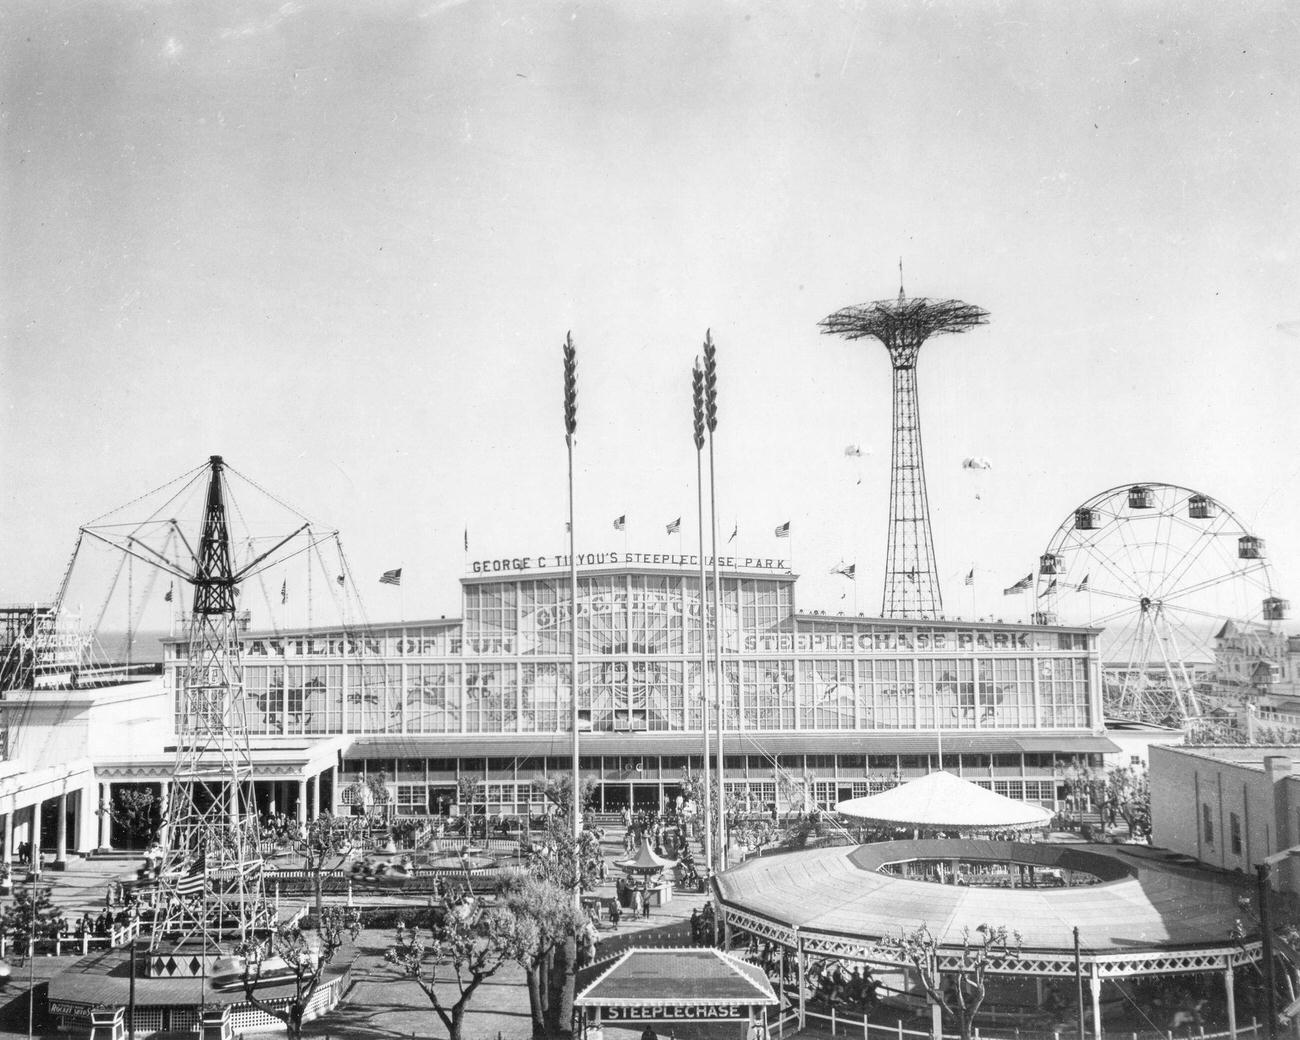 Rides At Steeplechase Park In Coney Island, Brooklyn, 1950.